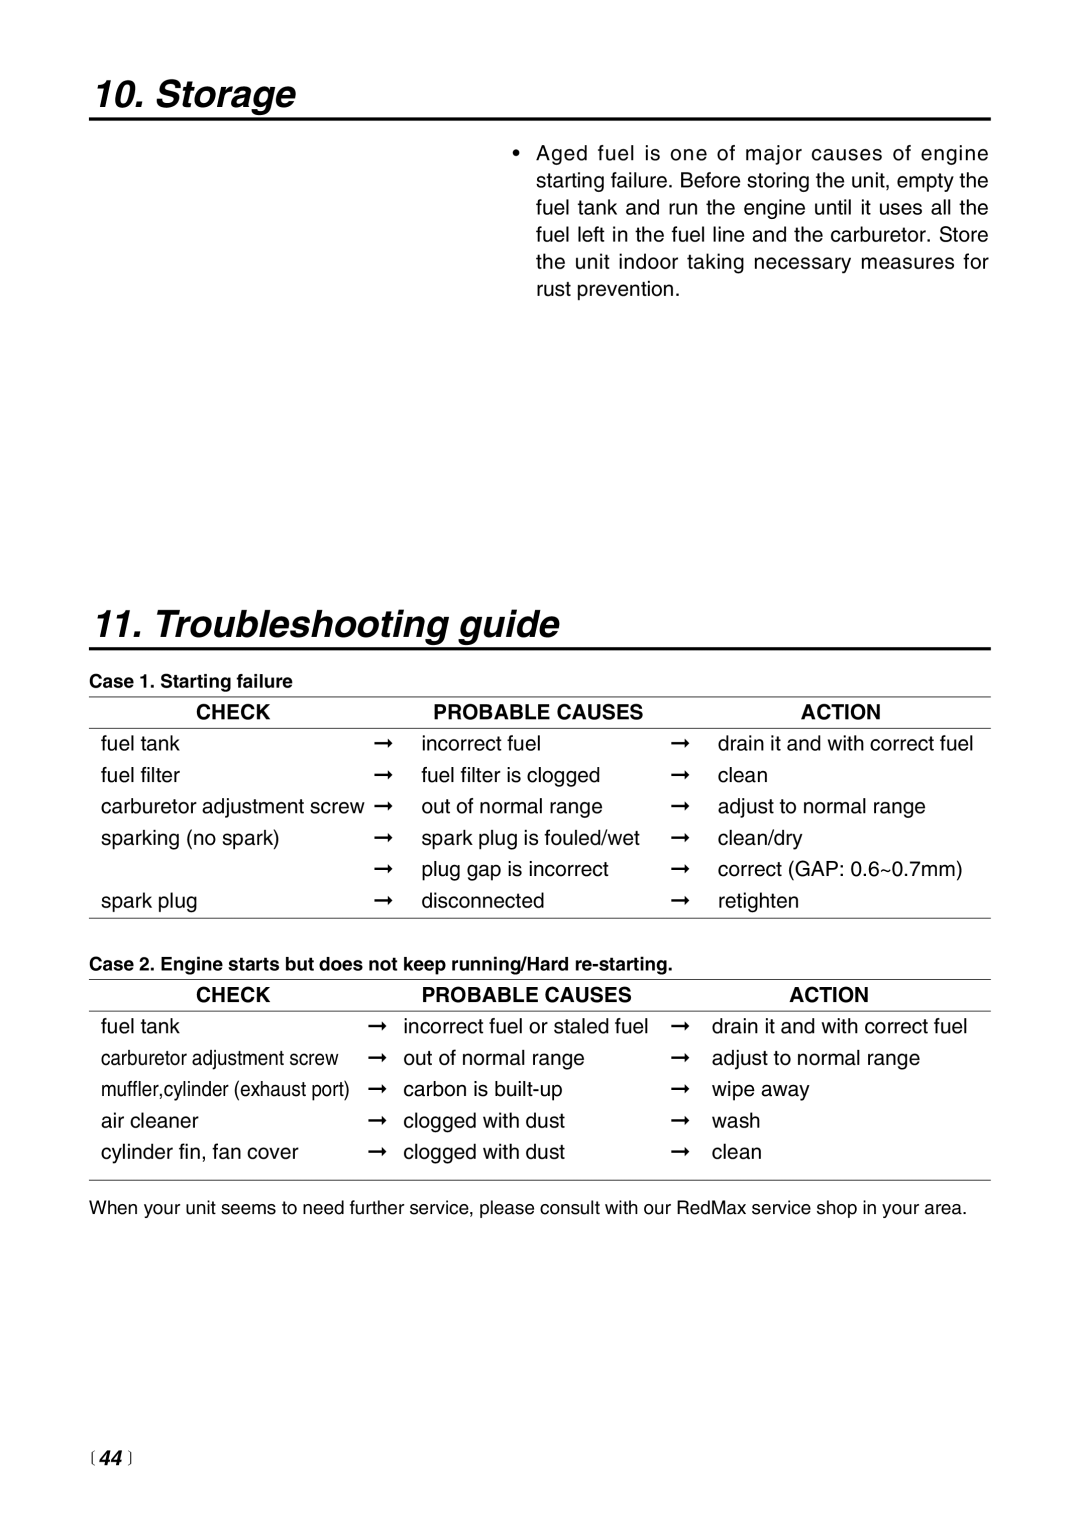 RedMax EX-BC manual Storage, Troubleshooting guide,  44  